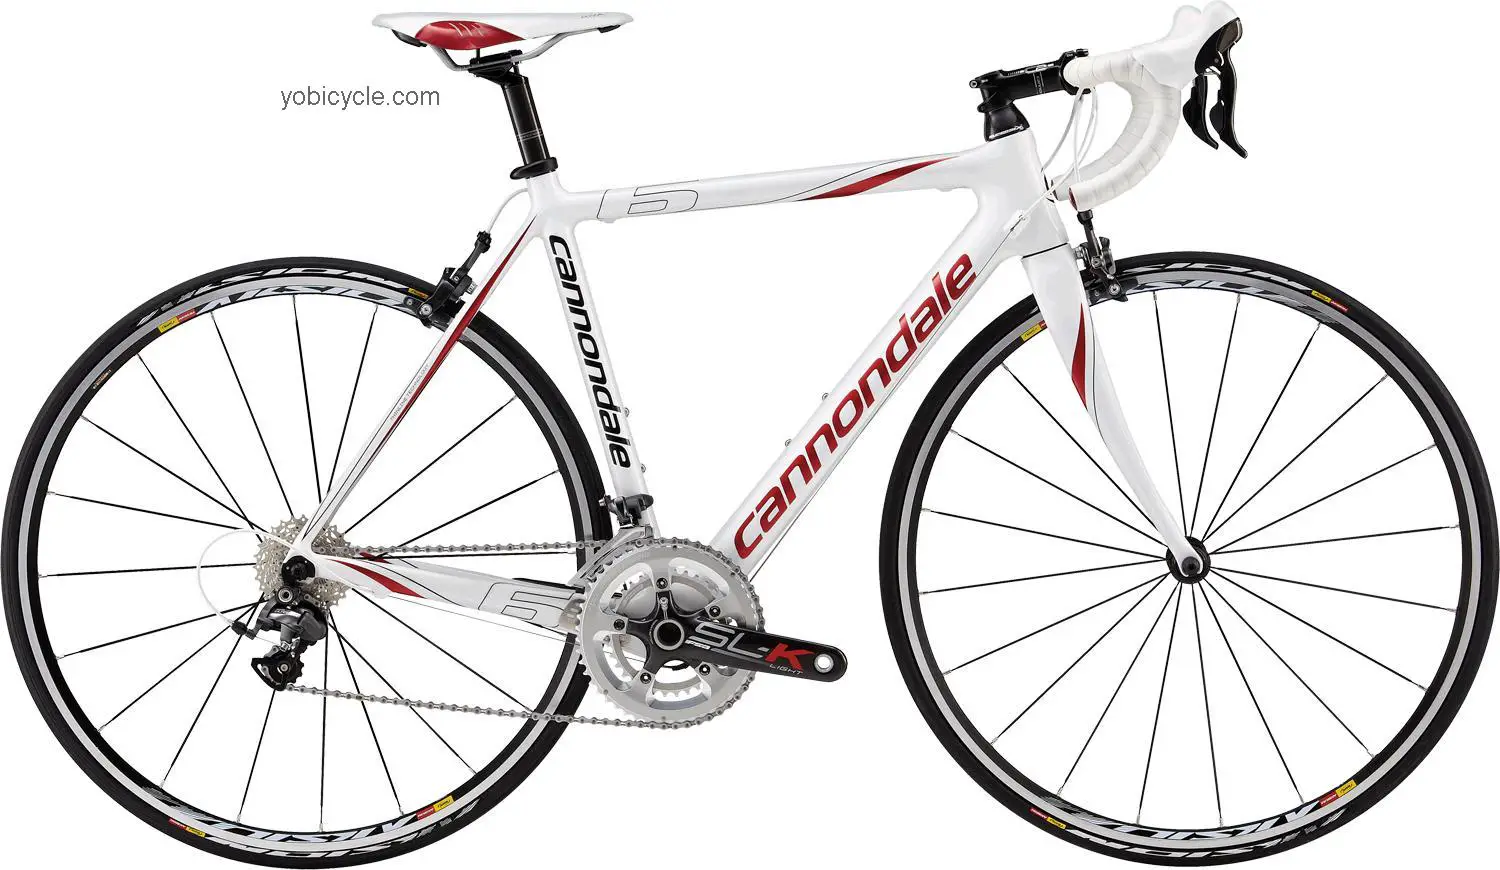 Cannondale Supersix Womens 3 Ultegra 2013 comparison online with competitors